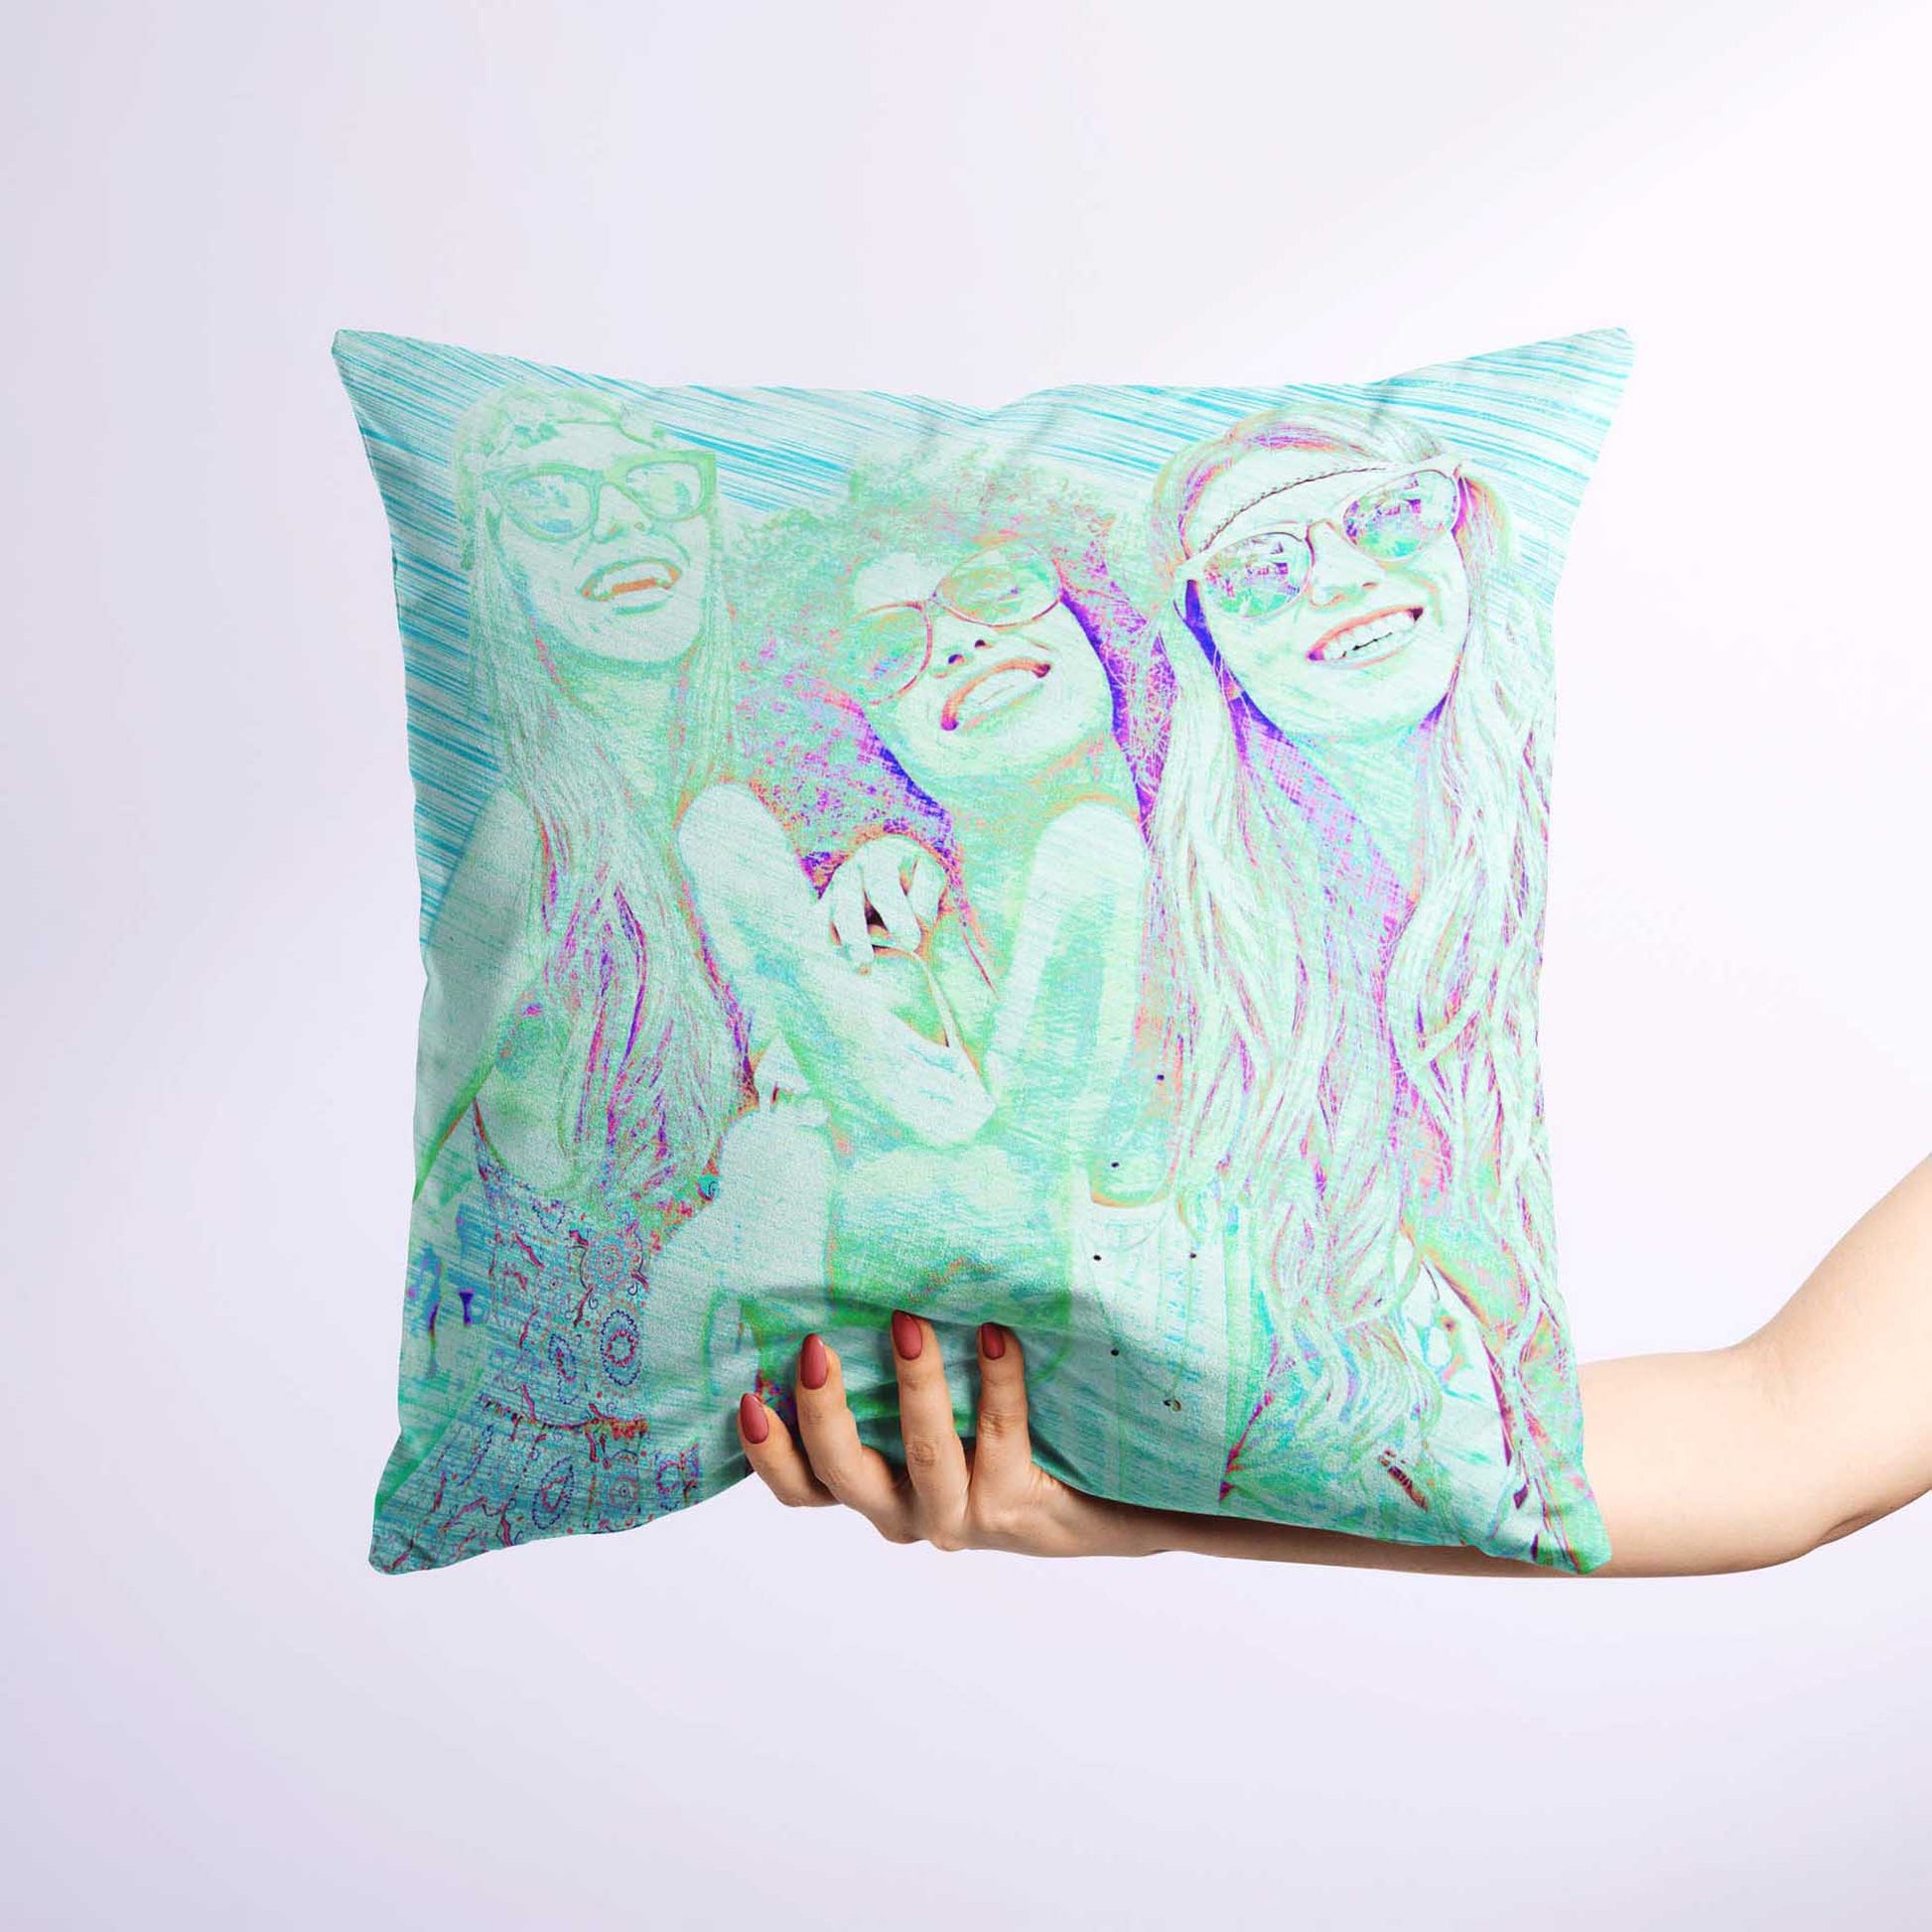 Add a touch of luxury and creativity to your home decor with the Personalised Blue Drawing Cushion. Its custom drawing, created from your photo, adds a unique and imaginative element. Made from soft velvet fabric, luxury cushion